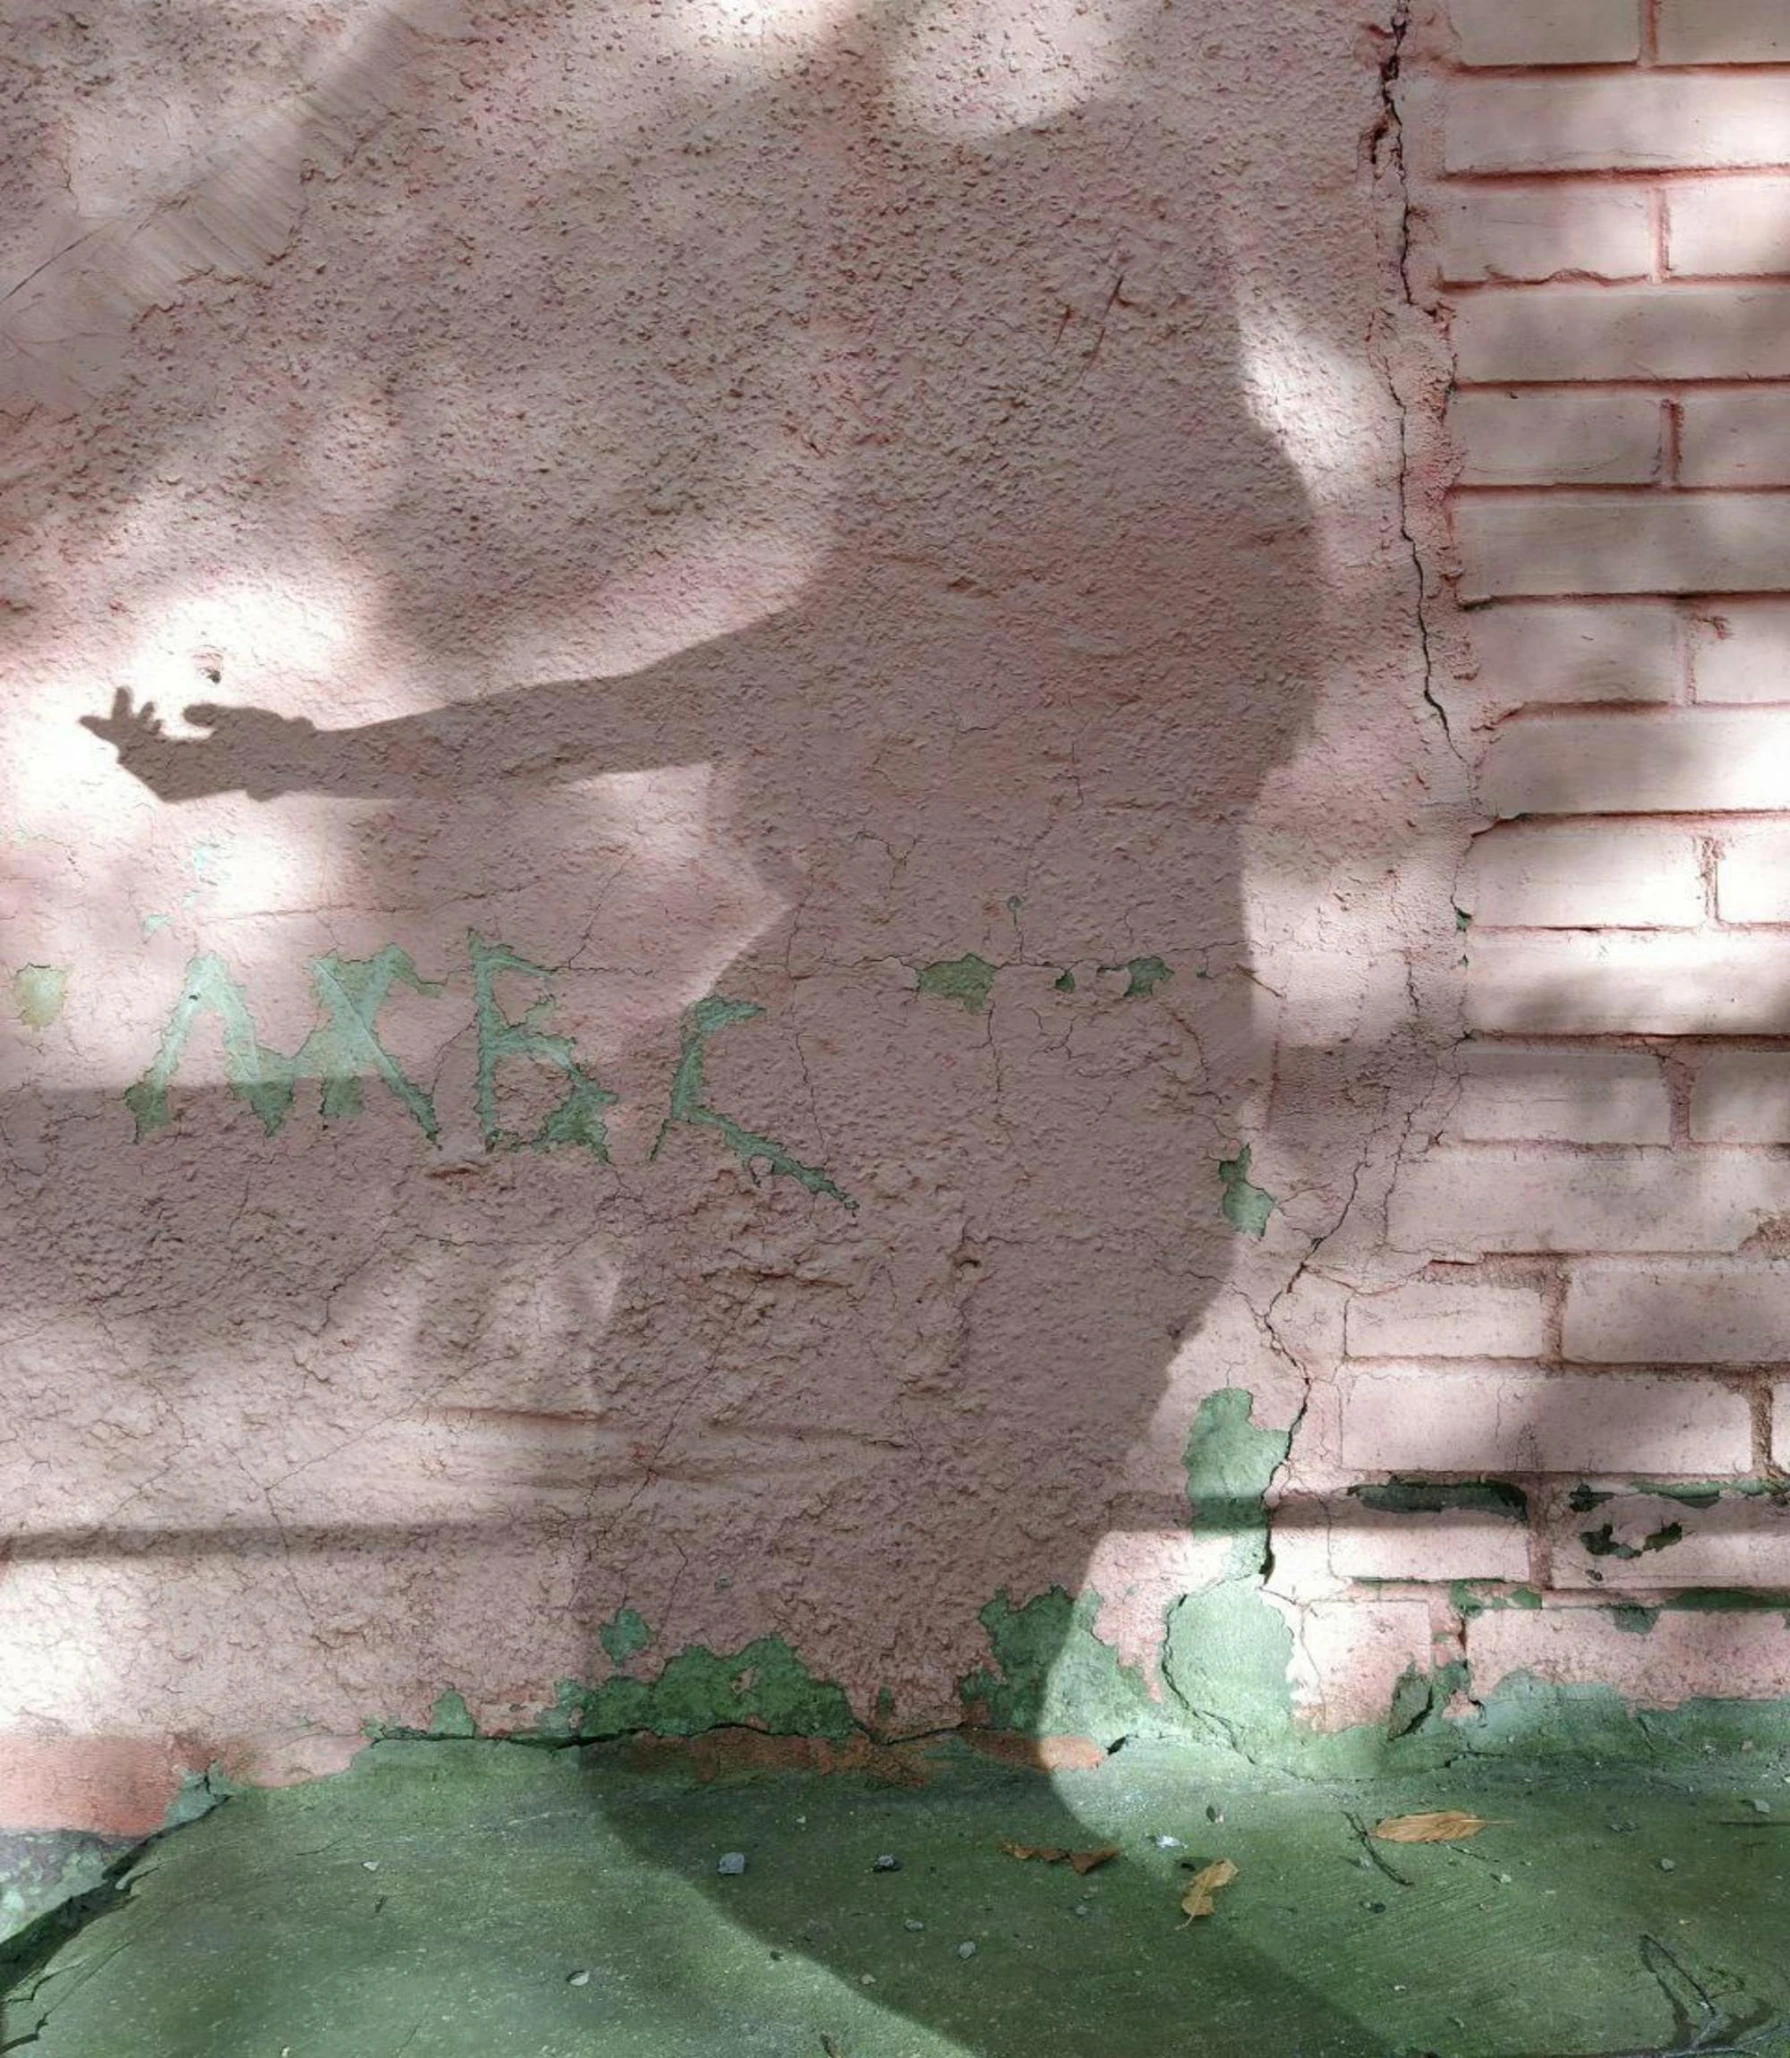 a shadow of a person on a pink wall pointing towards the left